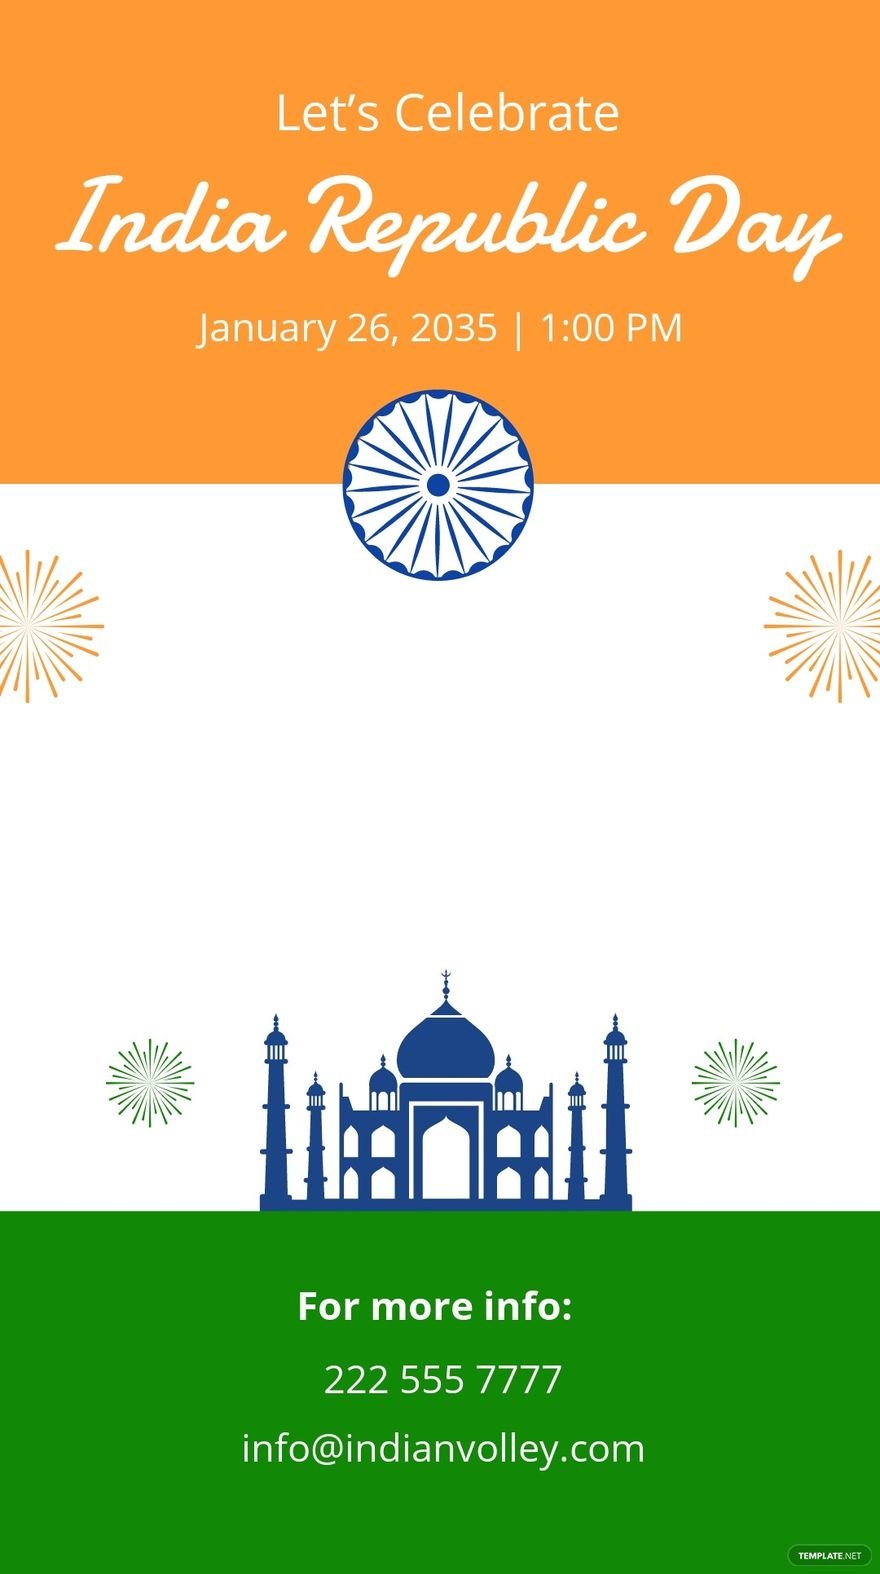 India Republic Day Event Snapchat Geofilter Template